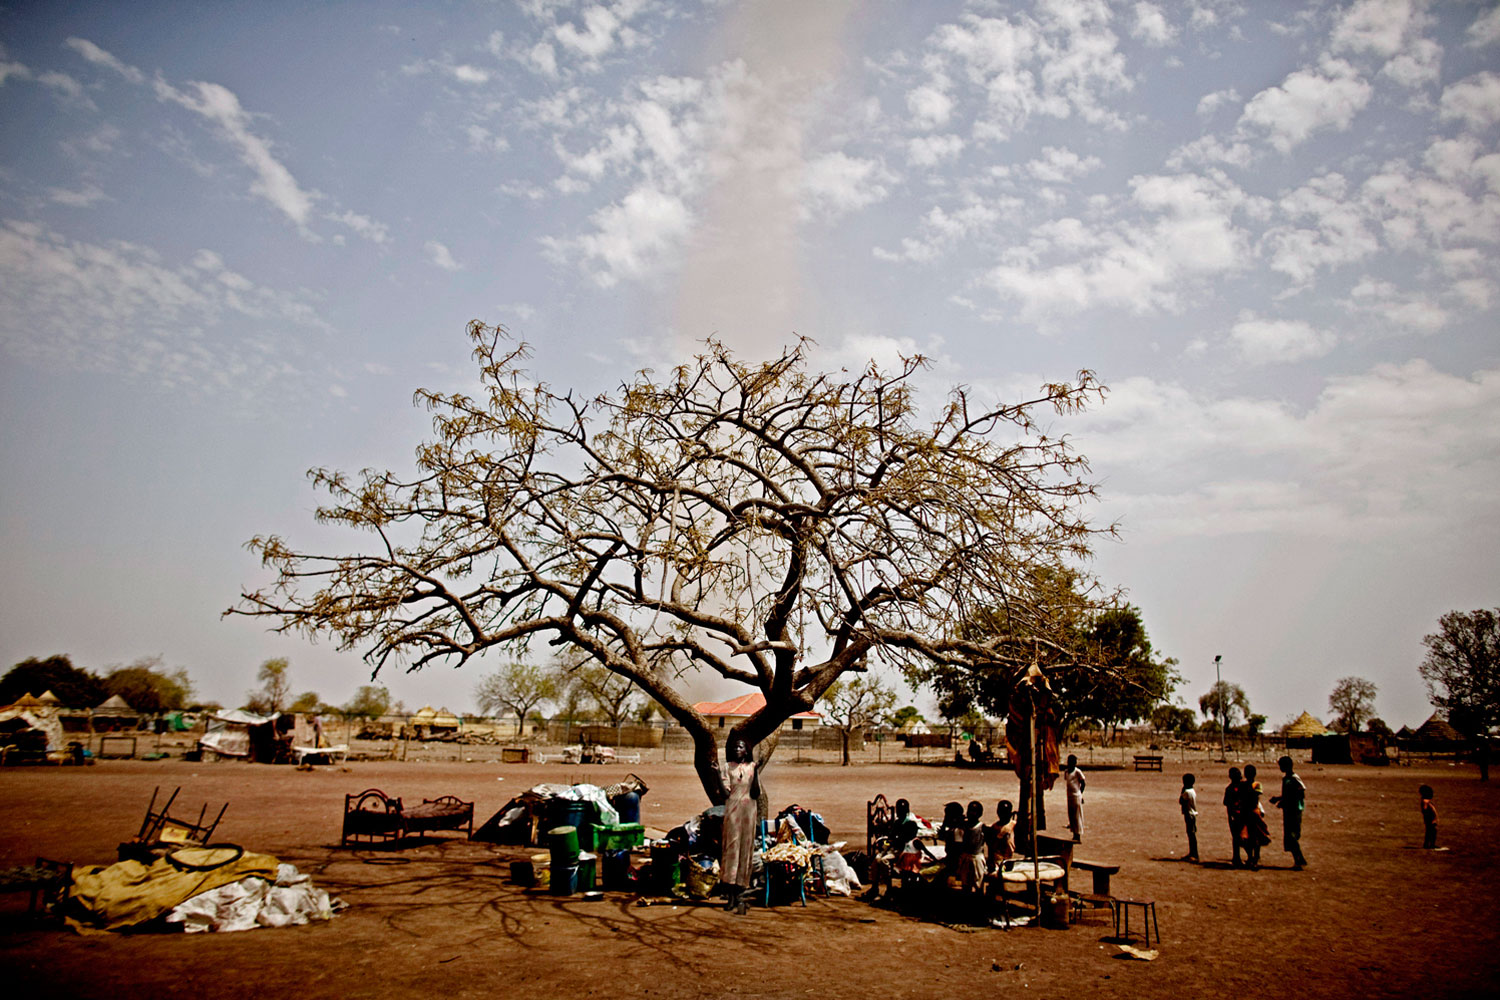 March 29, 2011. Southern Sudanese who returned from northern Sudan before the referendum live beneath a tree in the town of Kuajok. Hundreds of thousands of southerners living in the north returned between September and December 2010. Without land to return to, many remain stuck in transit camps where they wait for plot allocation from the southern government.